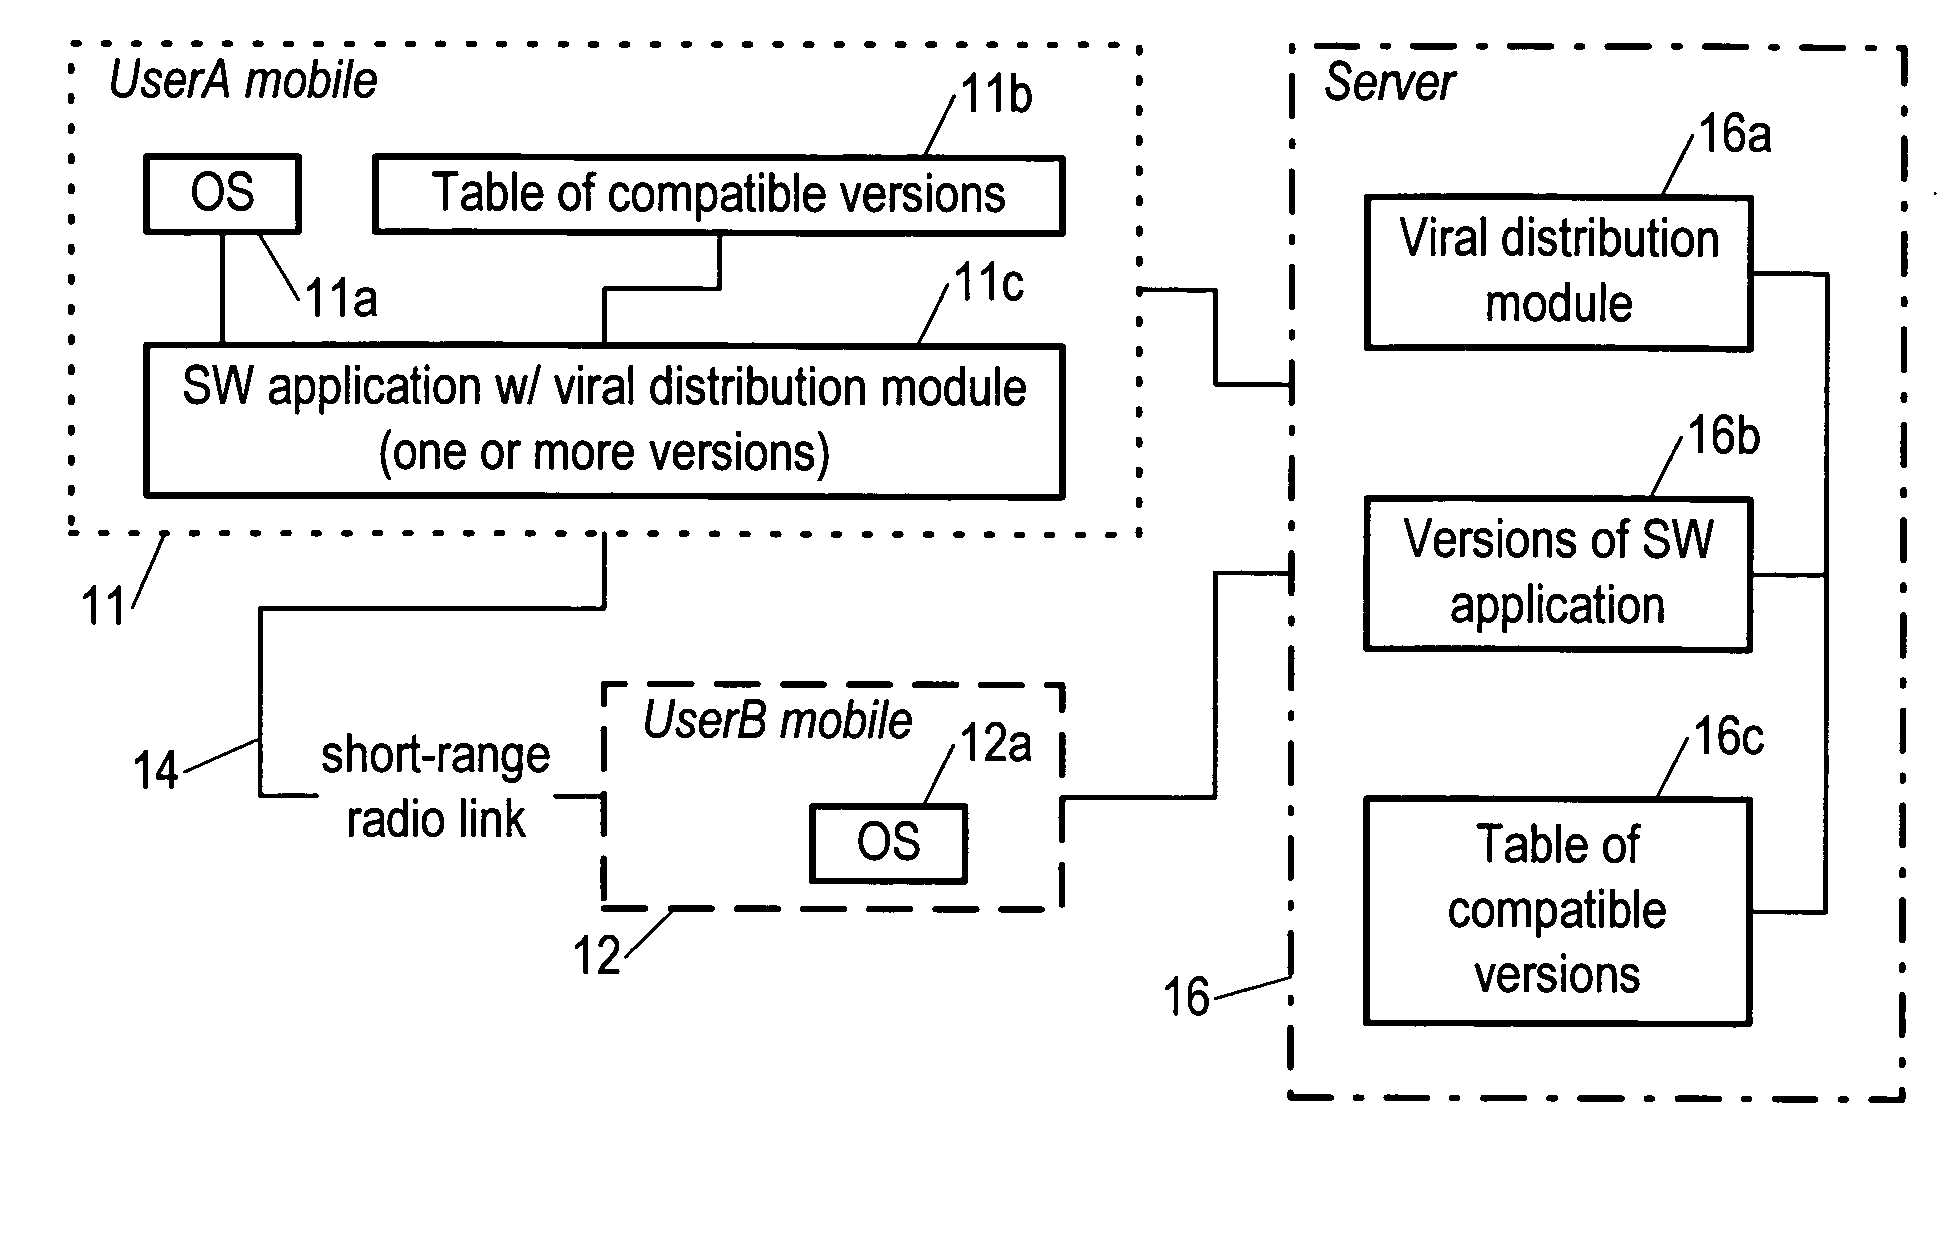 Device-to-device software distribution